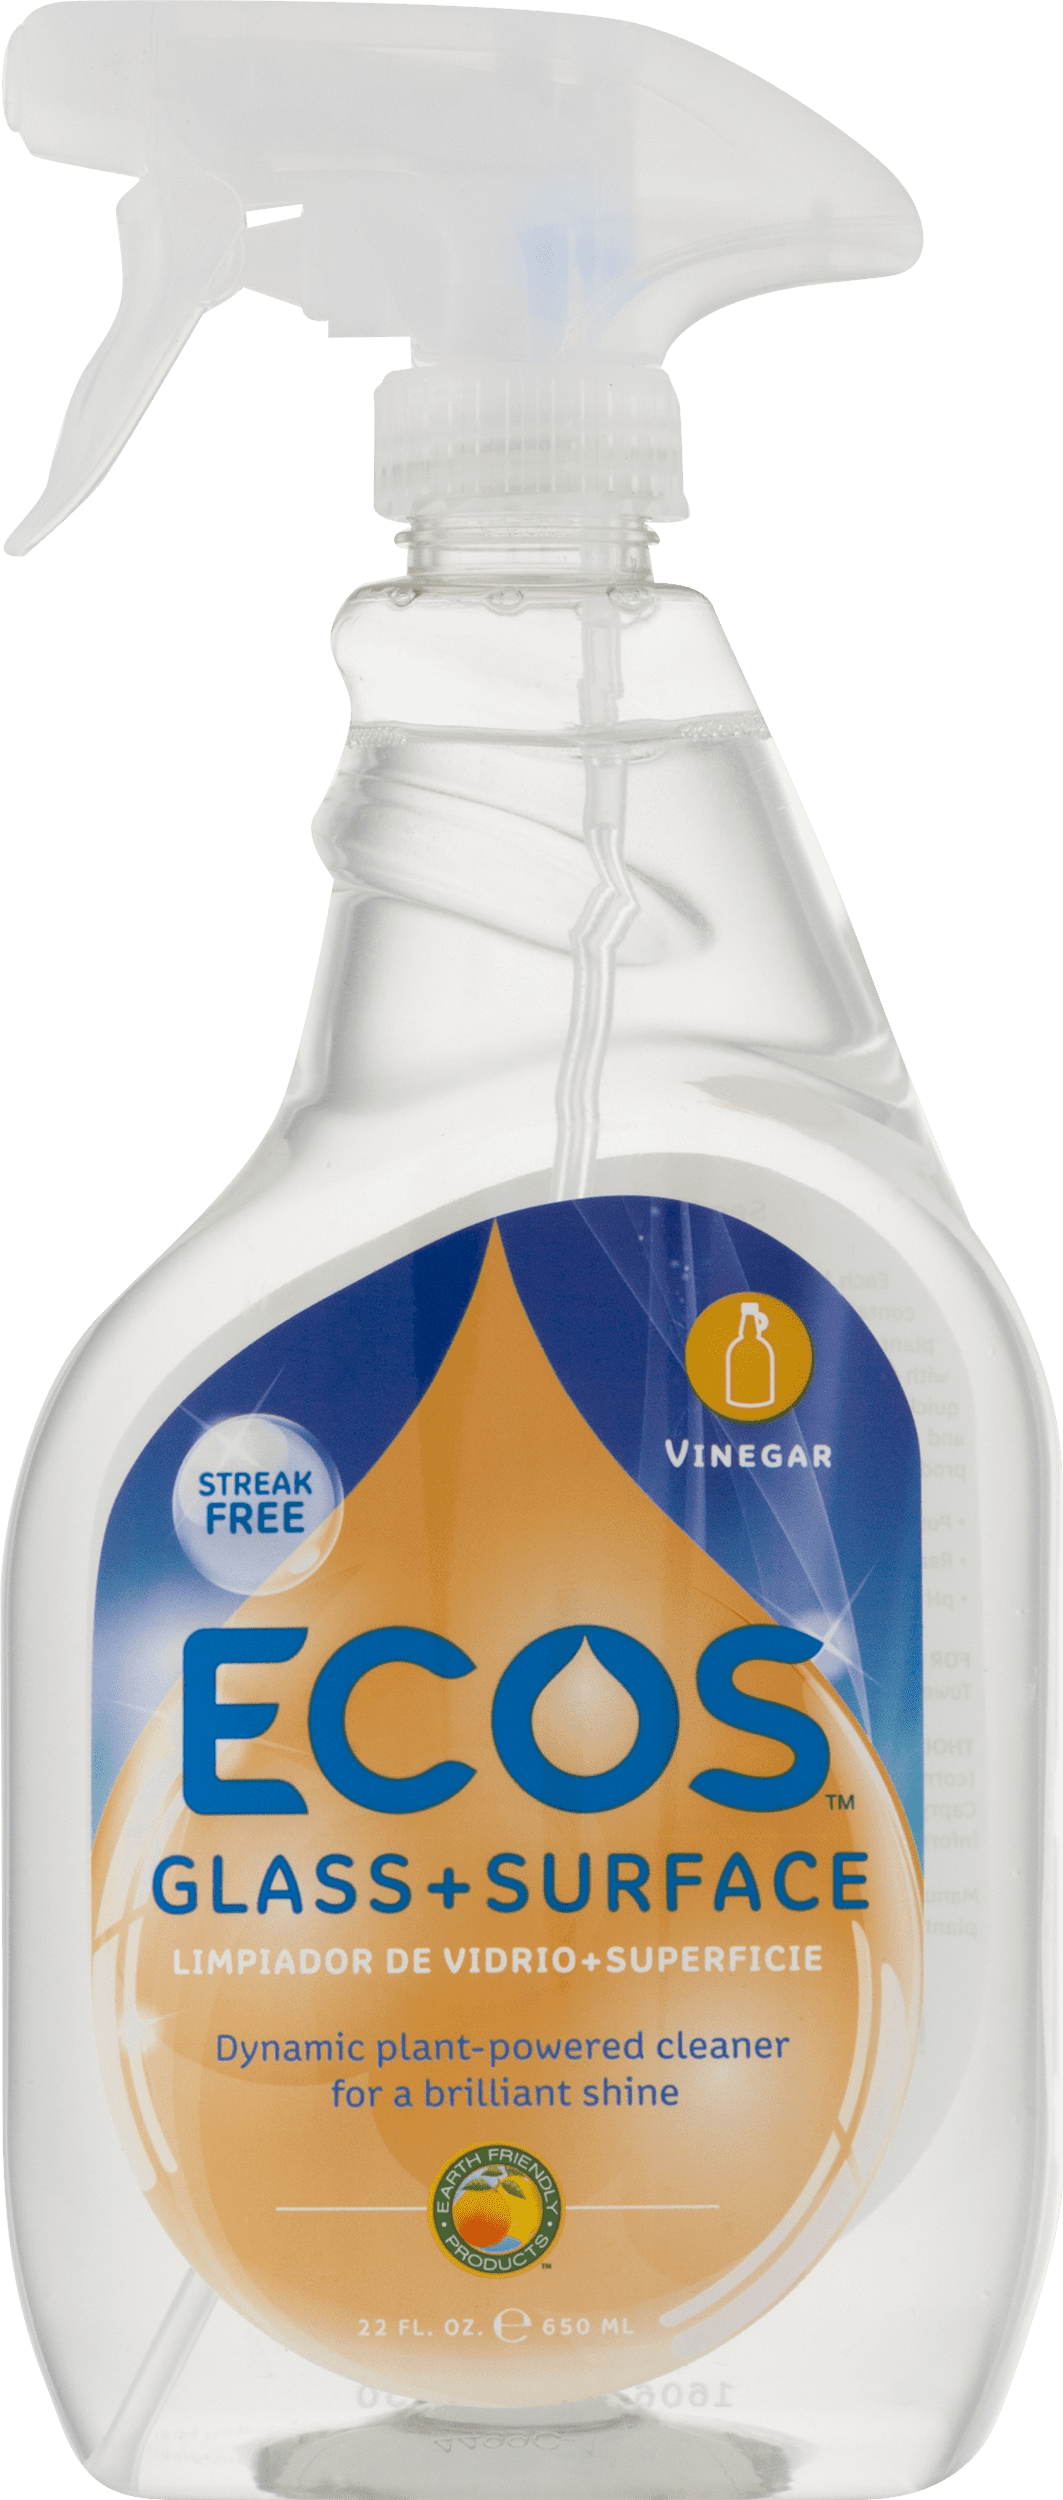 ECOS Streak Free Glass + Surface Cleaner